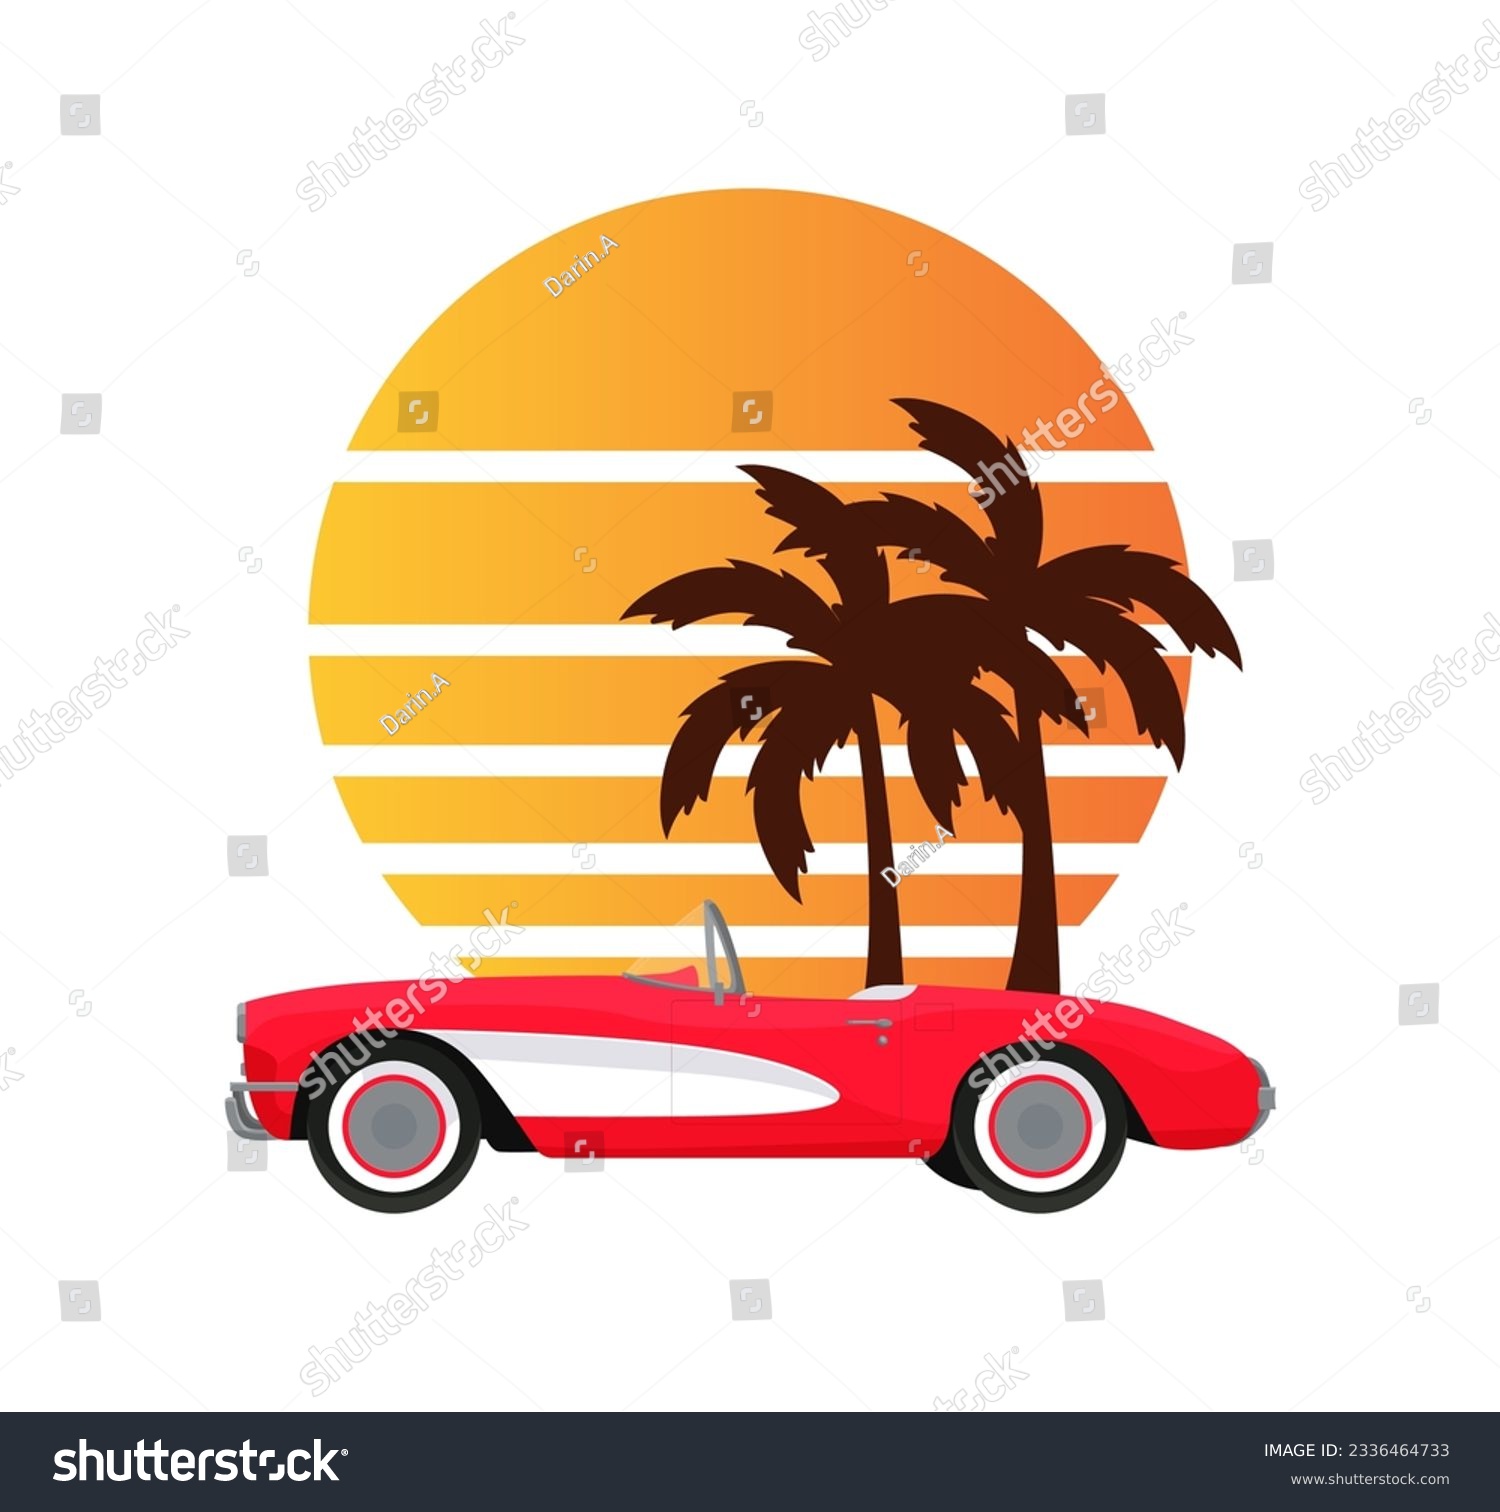 SVG of Red classic corvette car. Summer sunset with palm trees background in retro vintage style. Design print illustration, sticker, poster. Vector svg